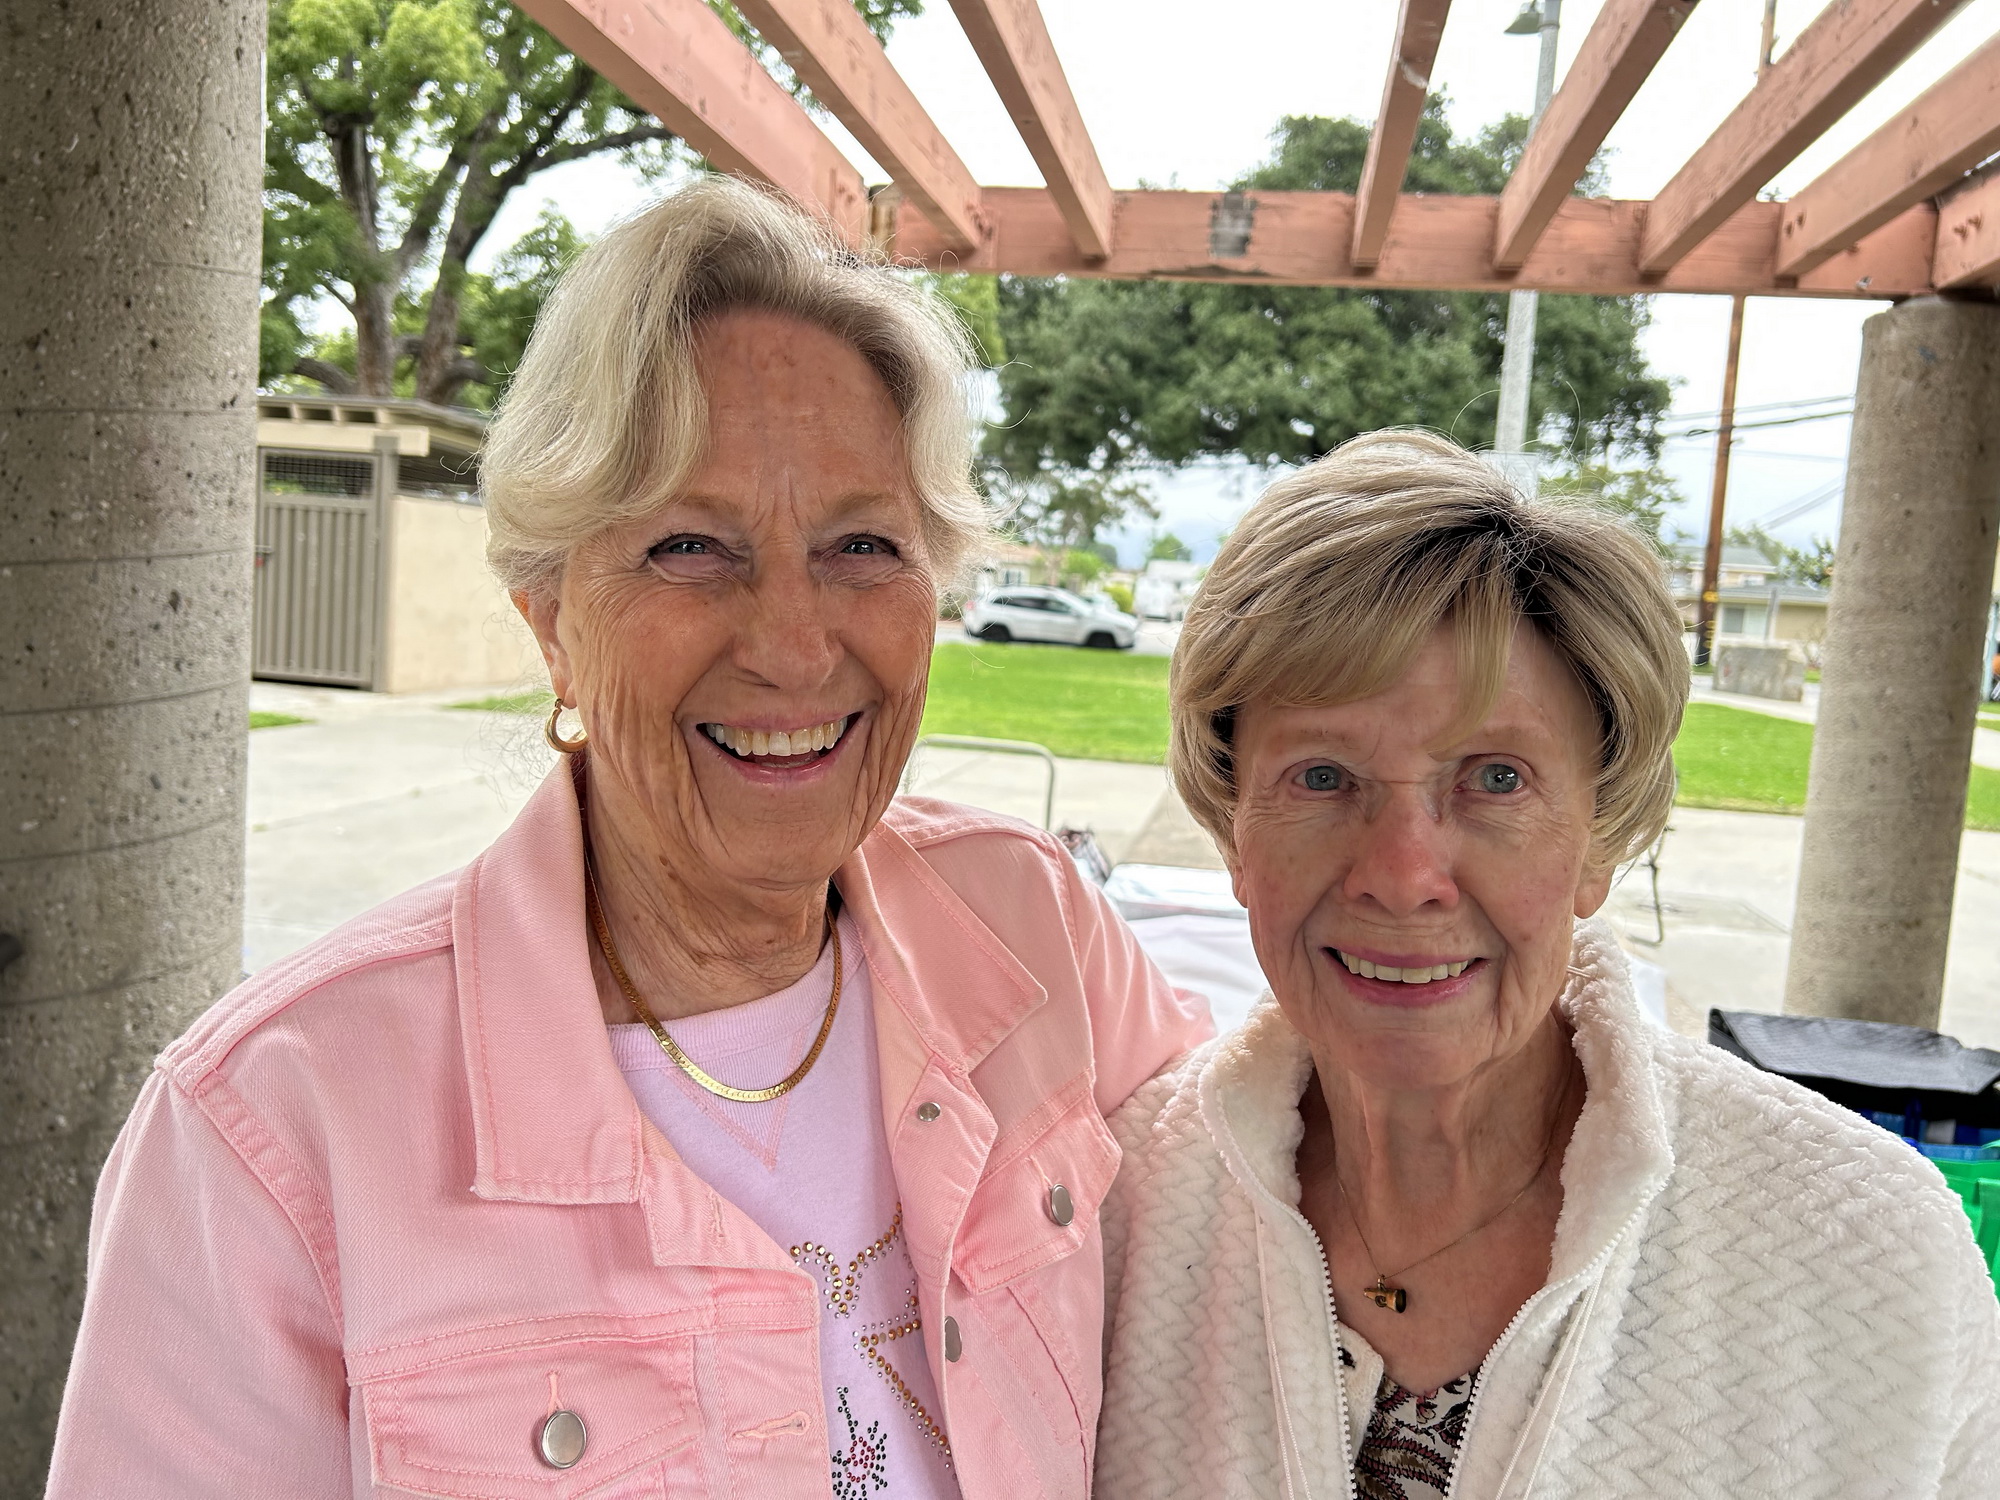 23-06-18-Class of 56 Reunion at CHS Elaine Graves and Melinda Jobe_No_02_resize